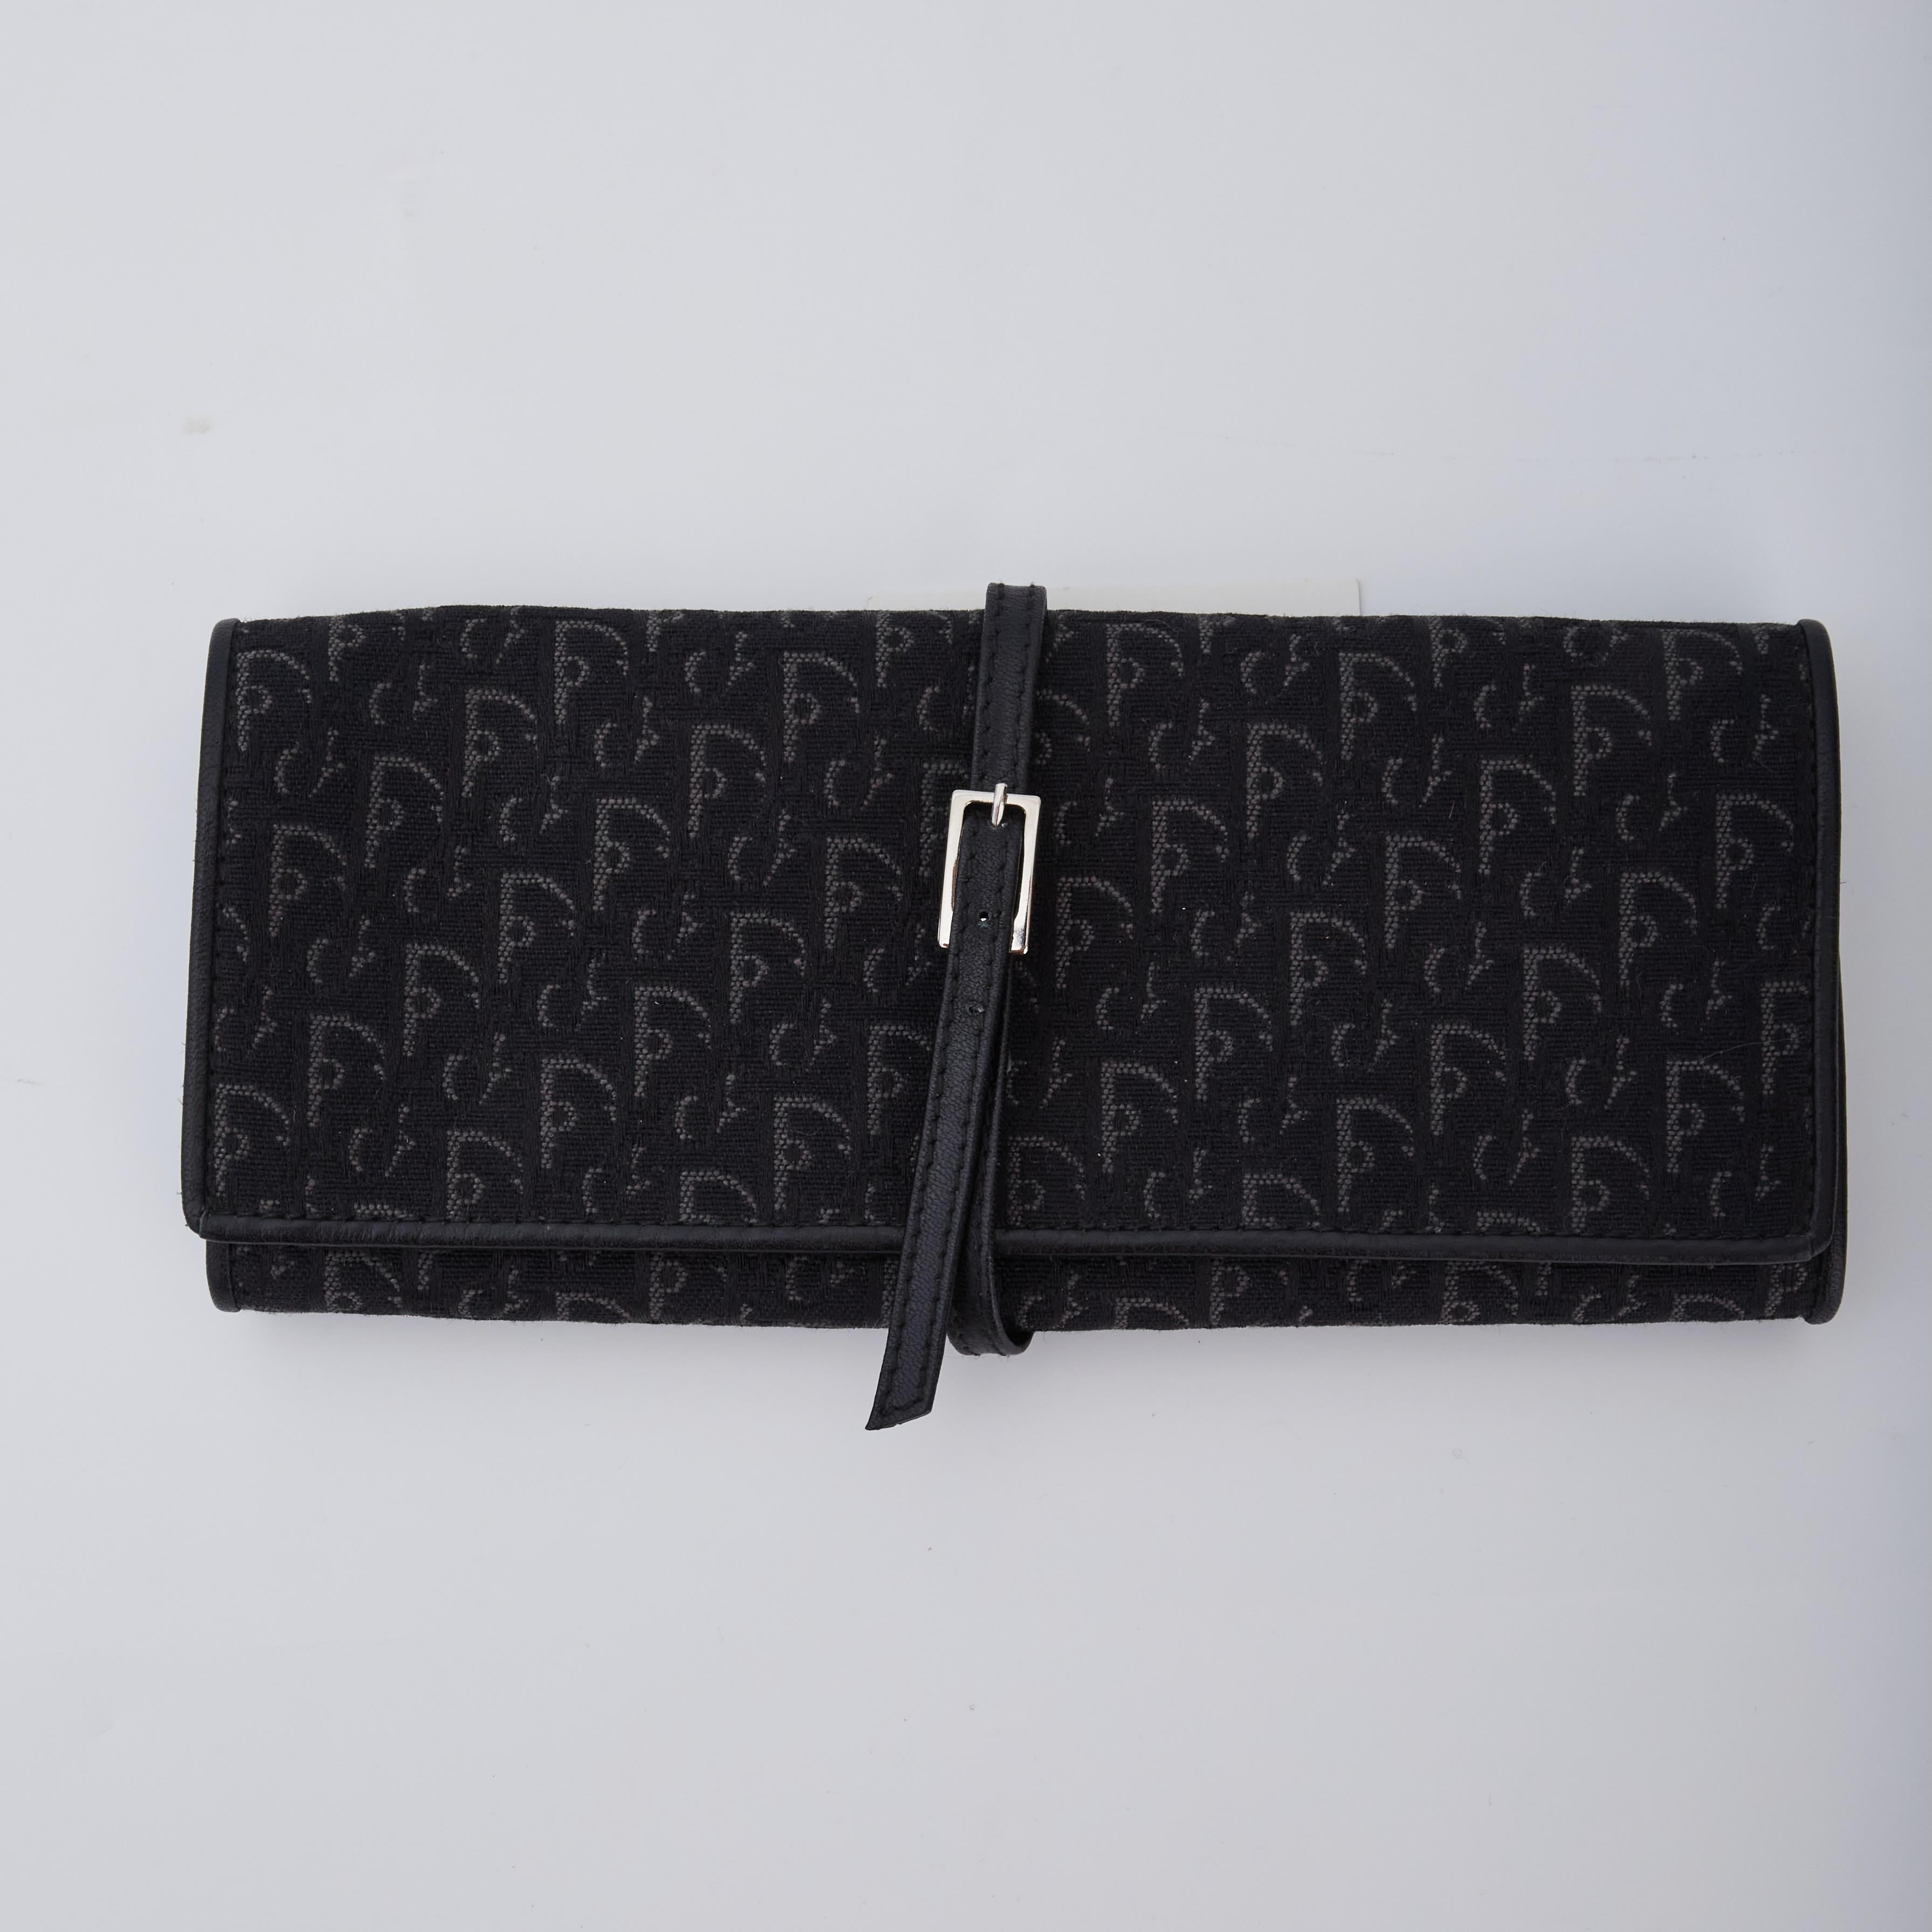 COLOR: Black
MATERIAL: Canvas
MEASURES: L 7” x W 3”
CONDITION: New

Made in France